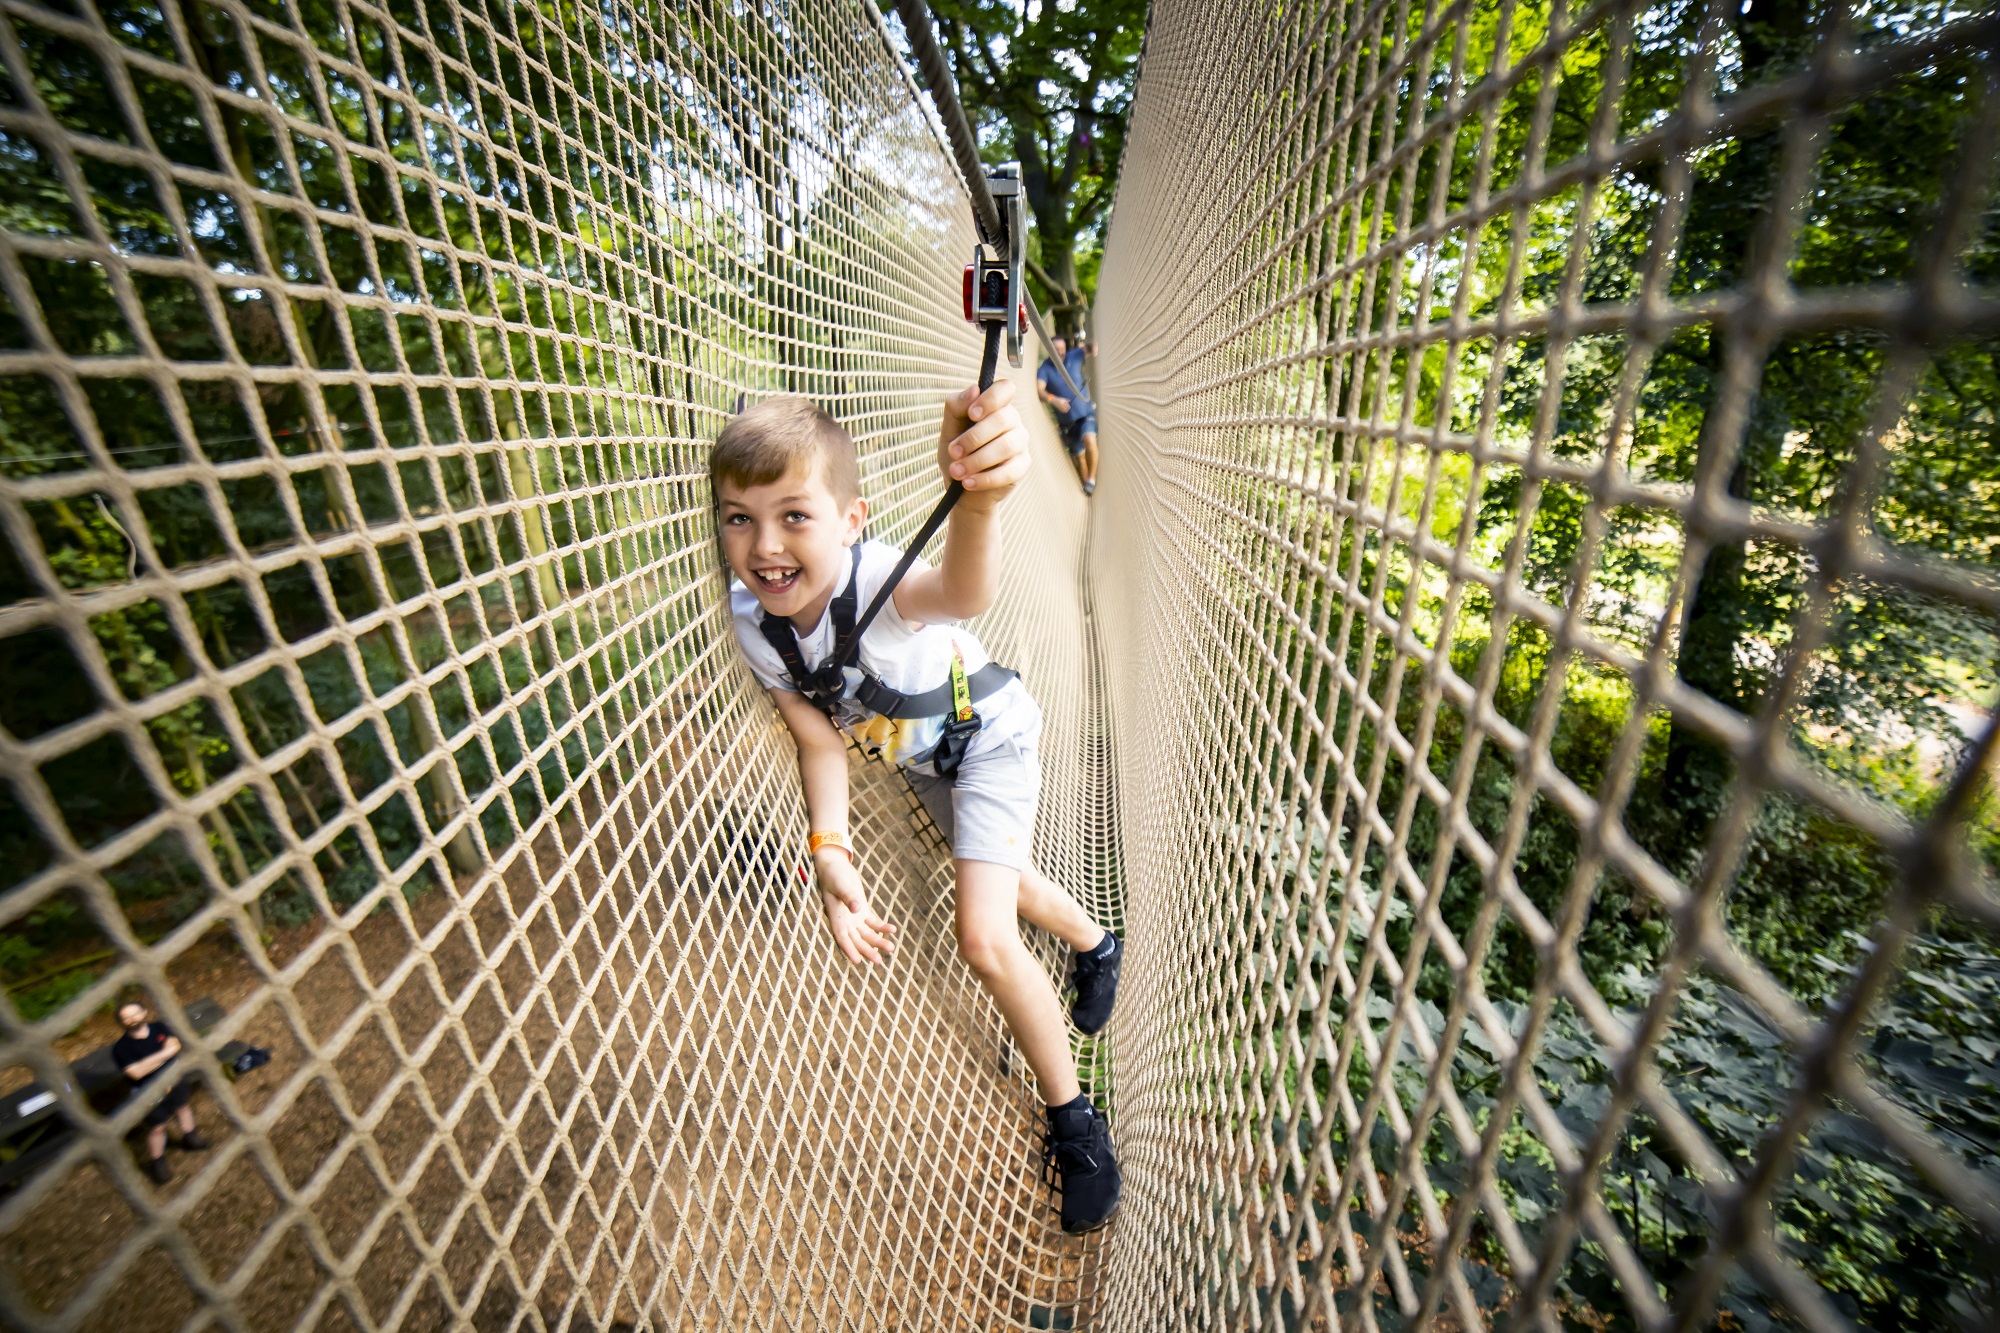 Young person using the net at Go Ape, Bracknell.